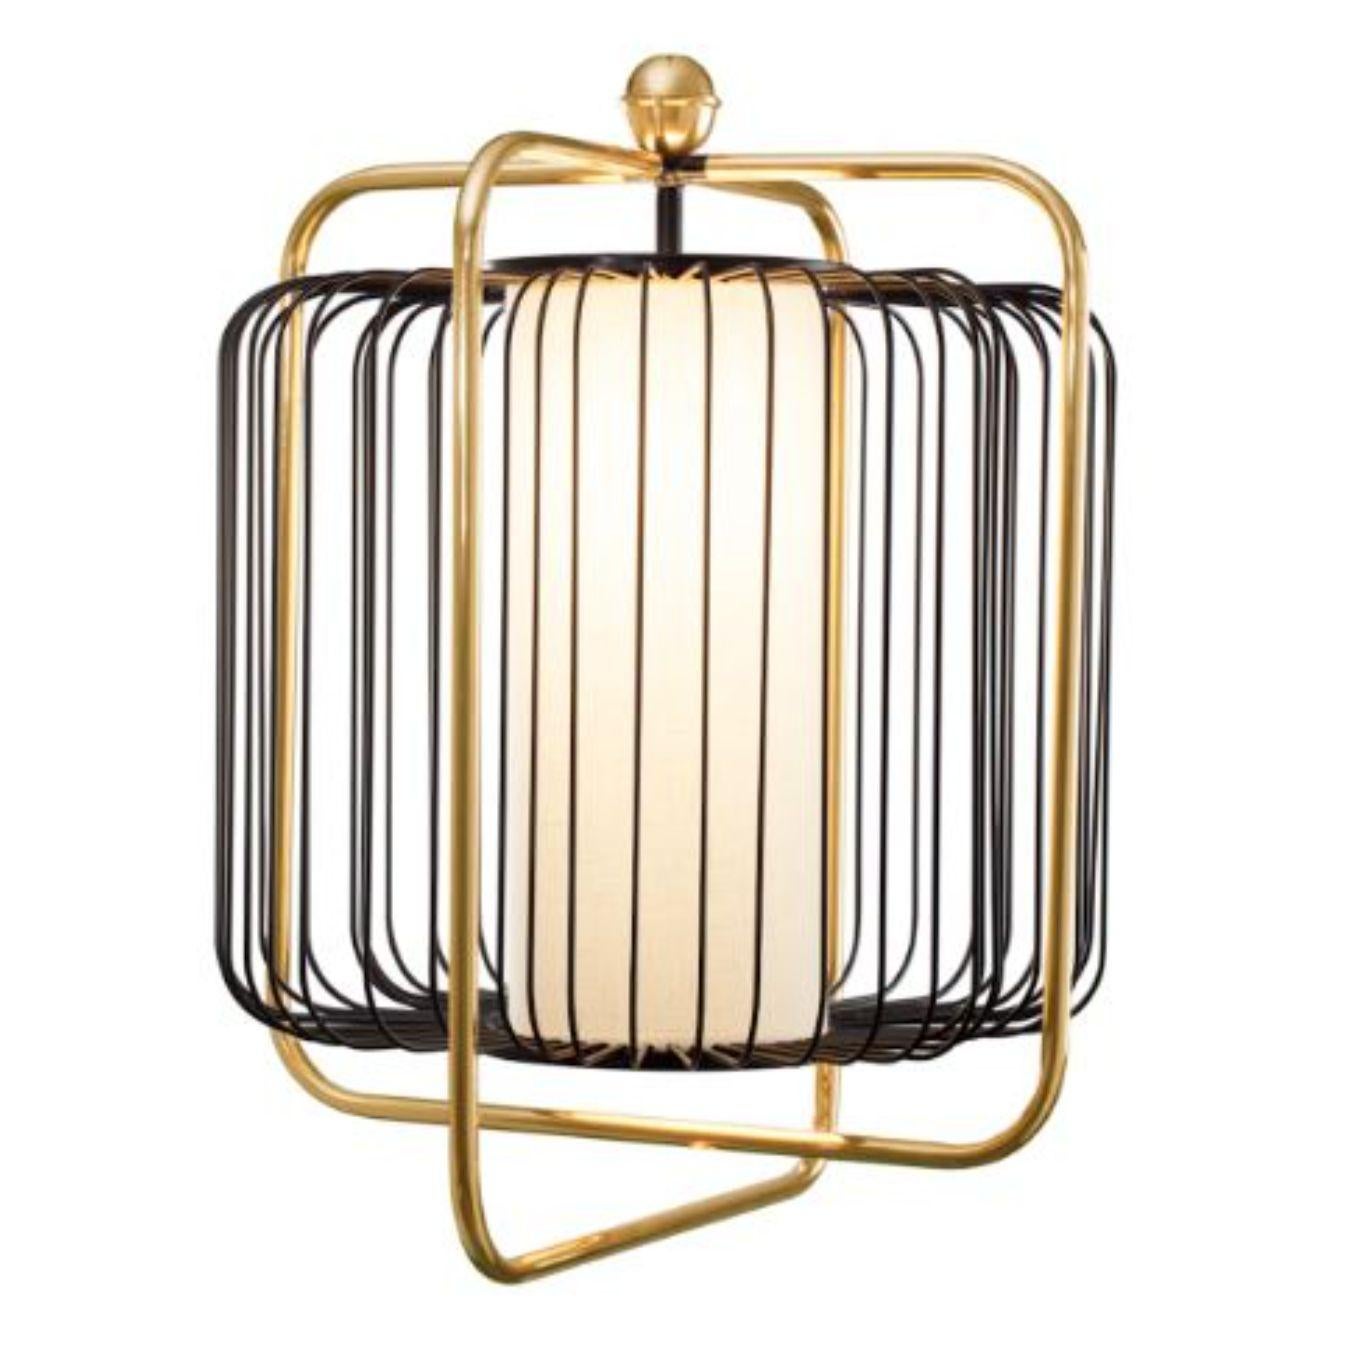 Brass and Black Jules Suspension lamp by Dooq
Dimensions: W 73 x D 73 x H 72 cm
Materials: lacquered metal, polished or brushed metal, brass.
abat-jour: cotton
Also available in different colours and materials. Please contact